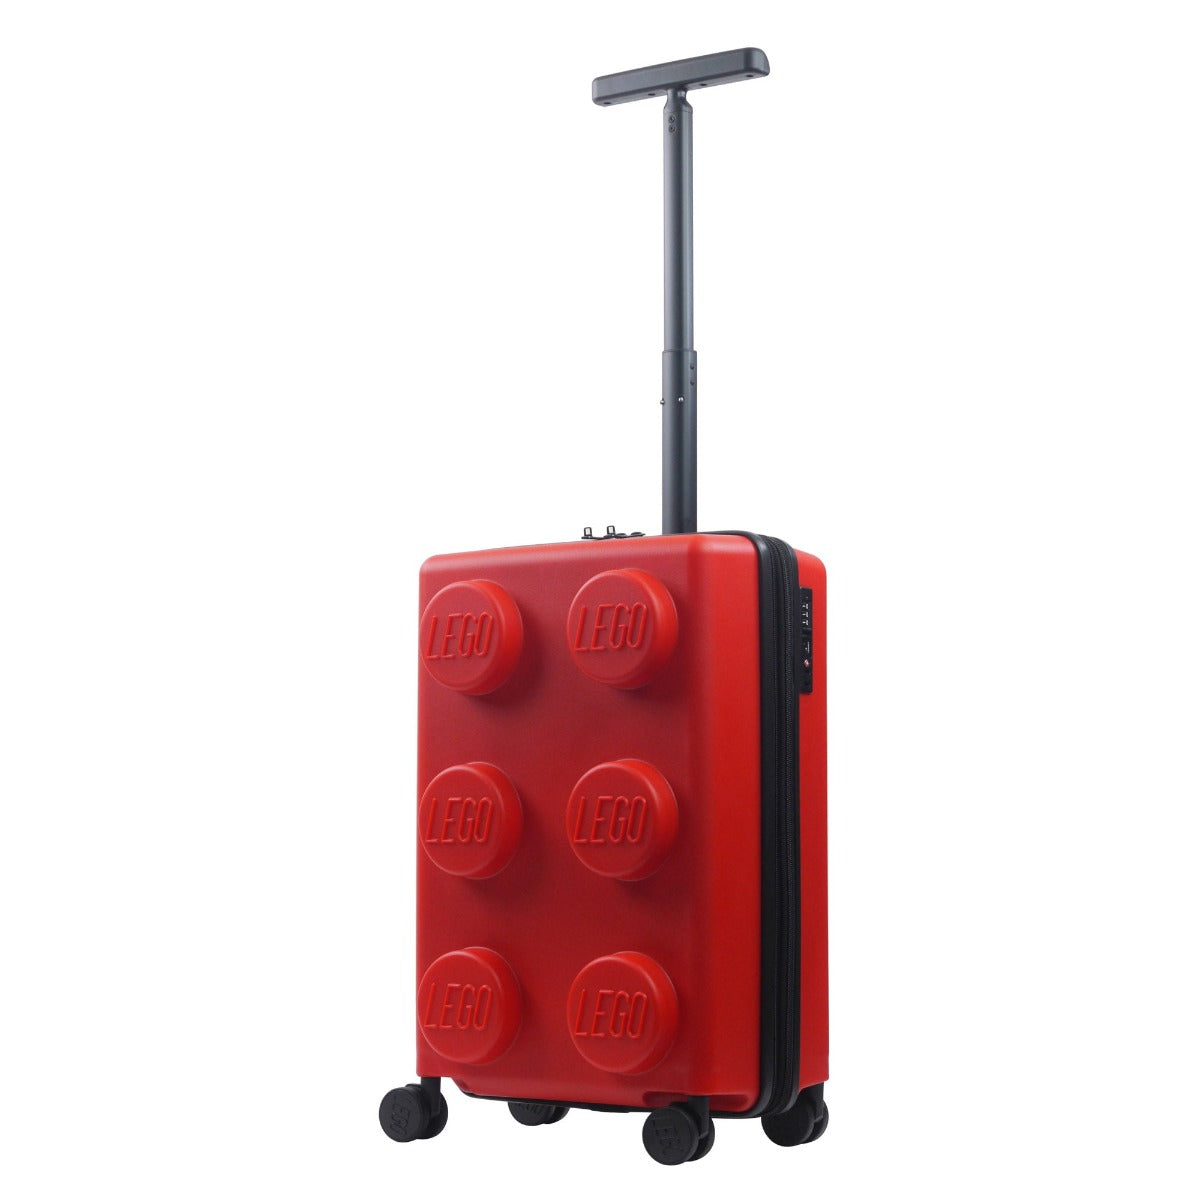 Red Lego Signature Brick 2X3 trolley 22" carry-on rolling luggage spinner suitcase